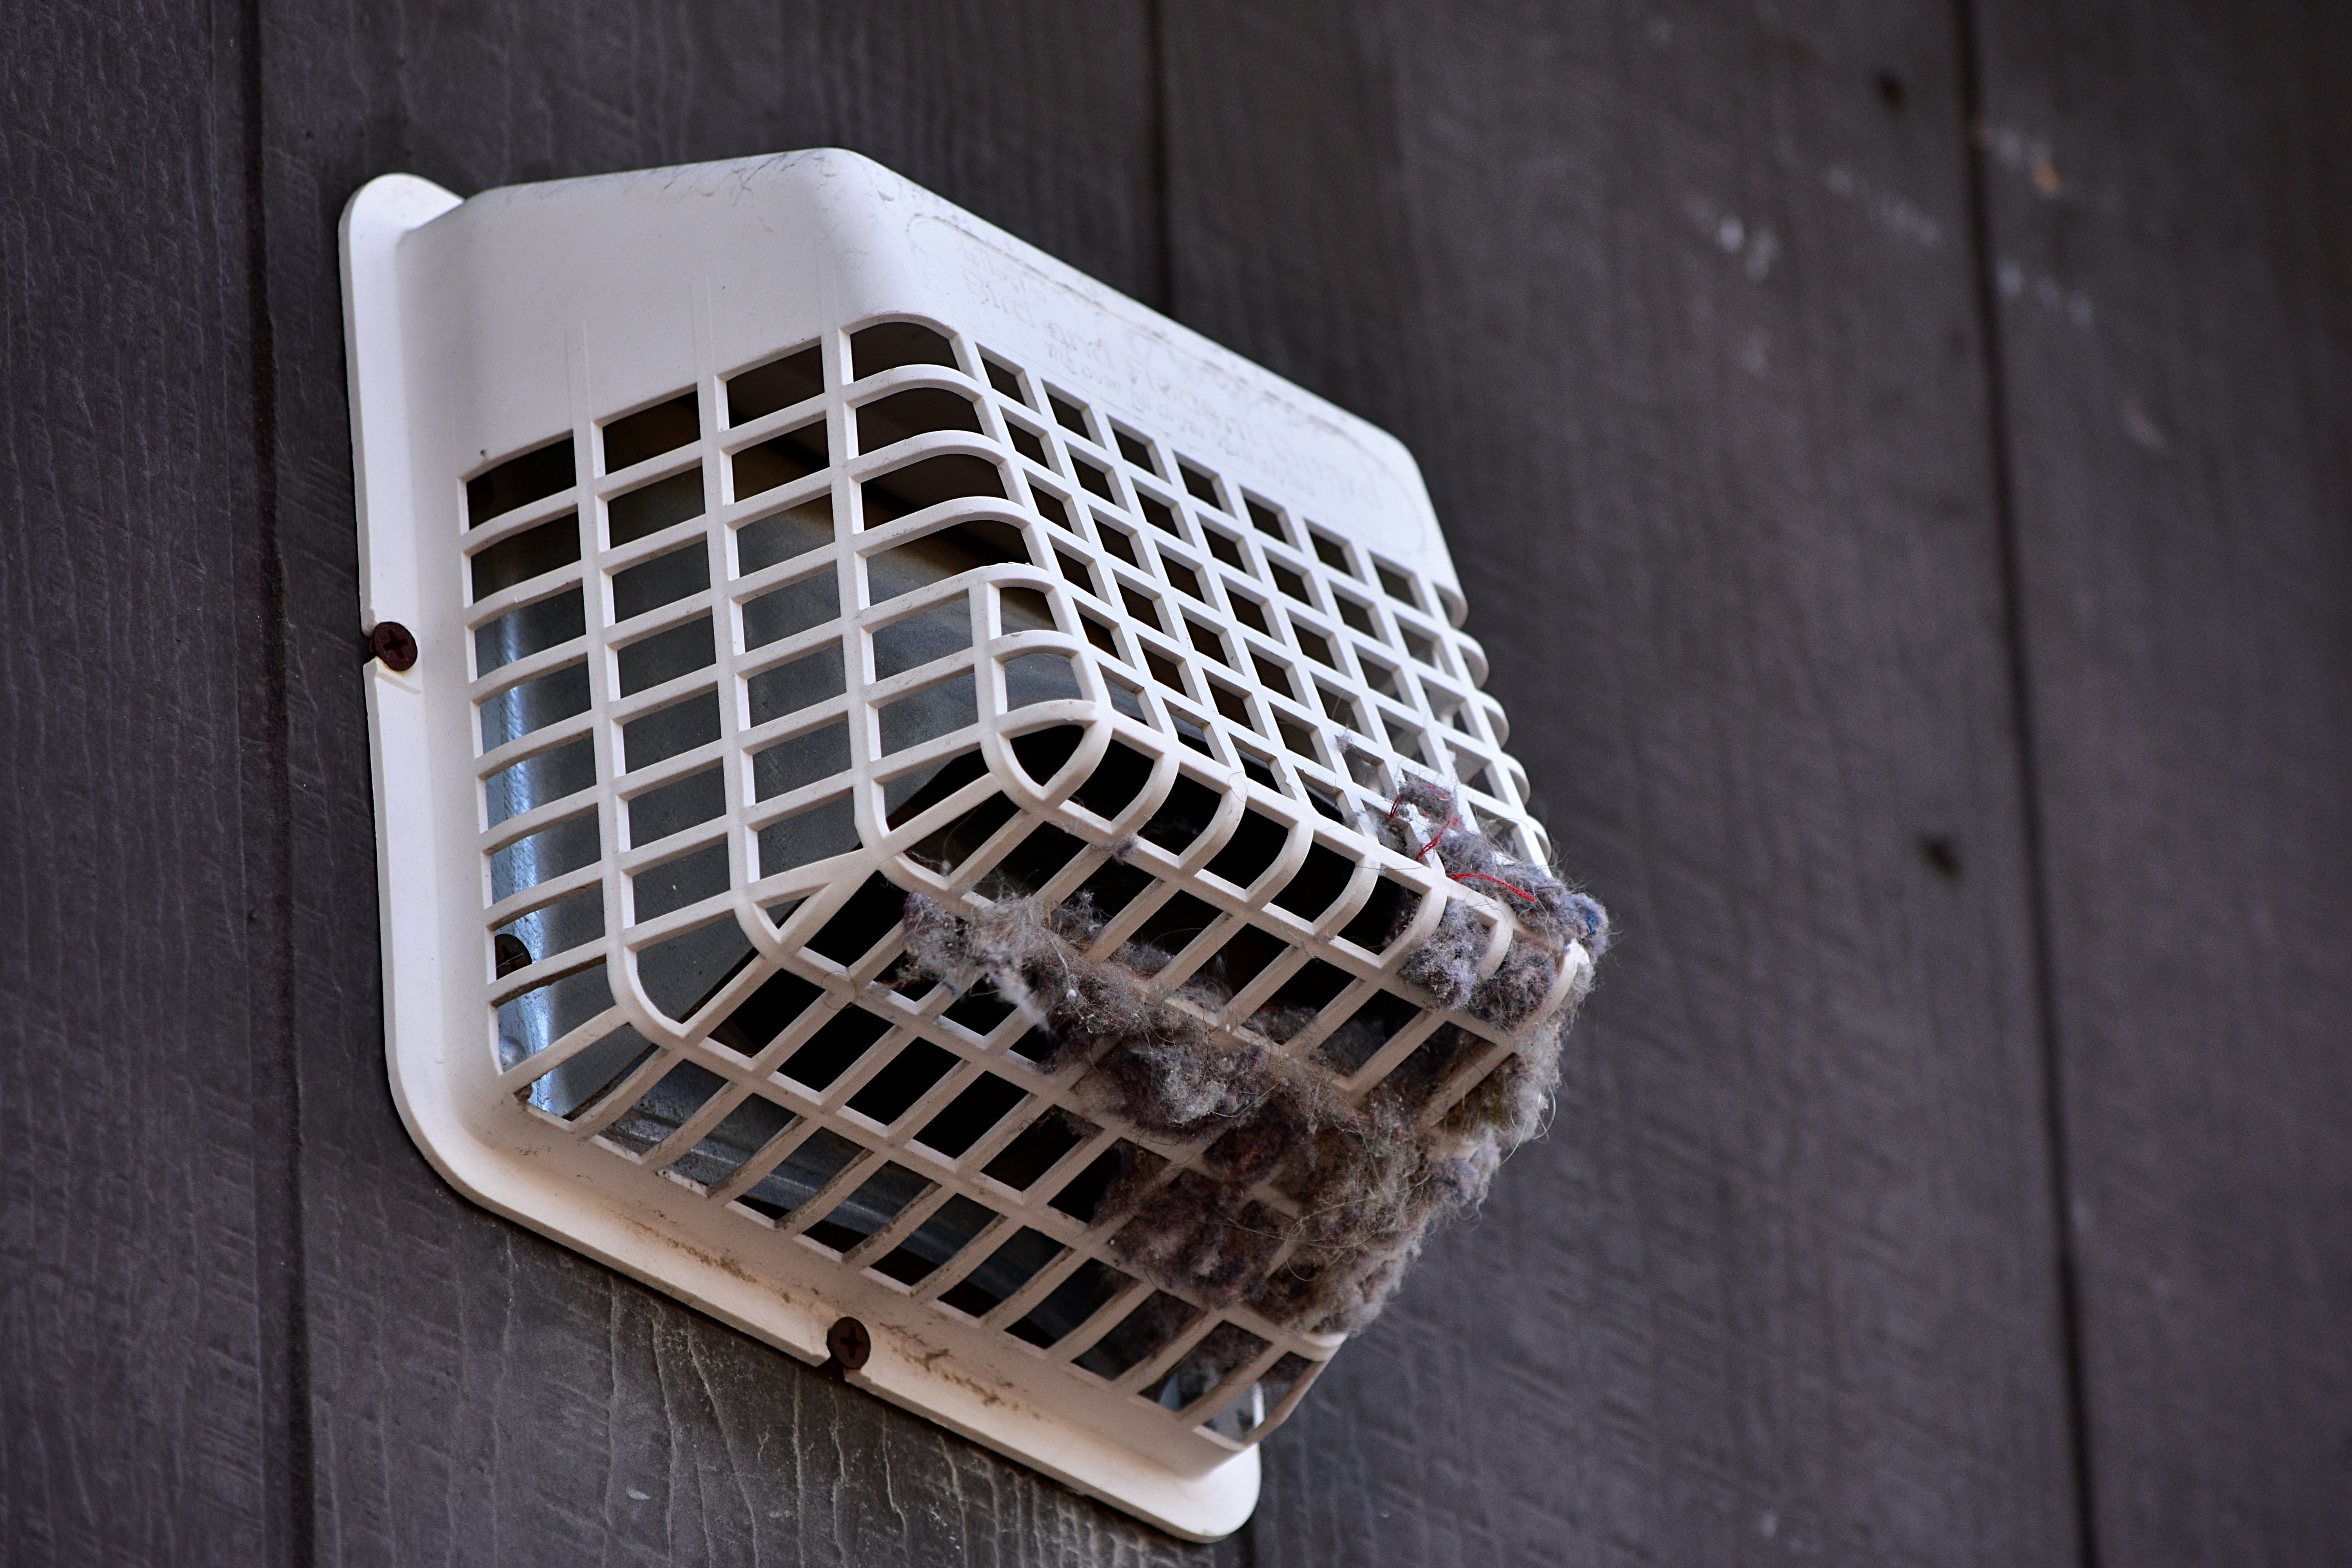 Avoid Unnecessary Fire Risks and Clean Your Dryer Vent